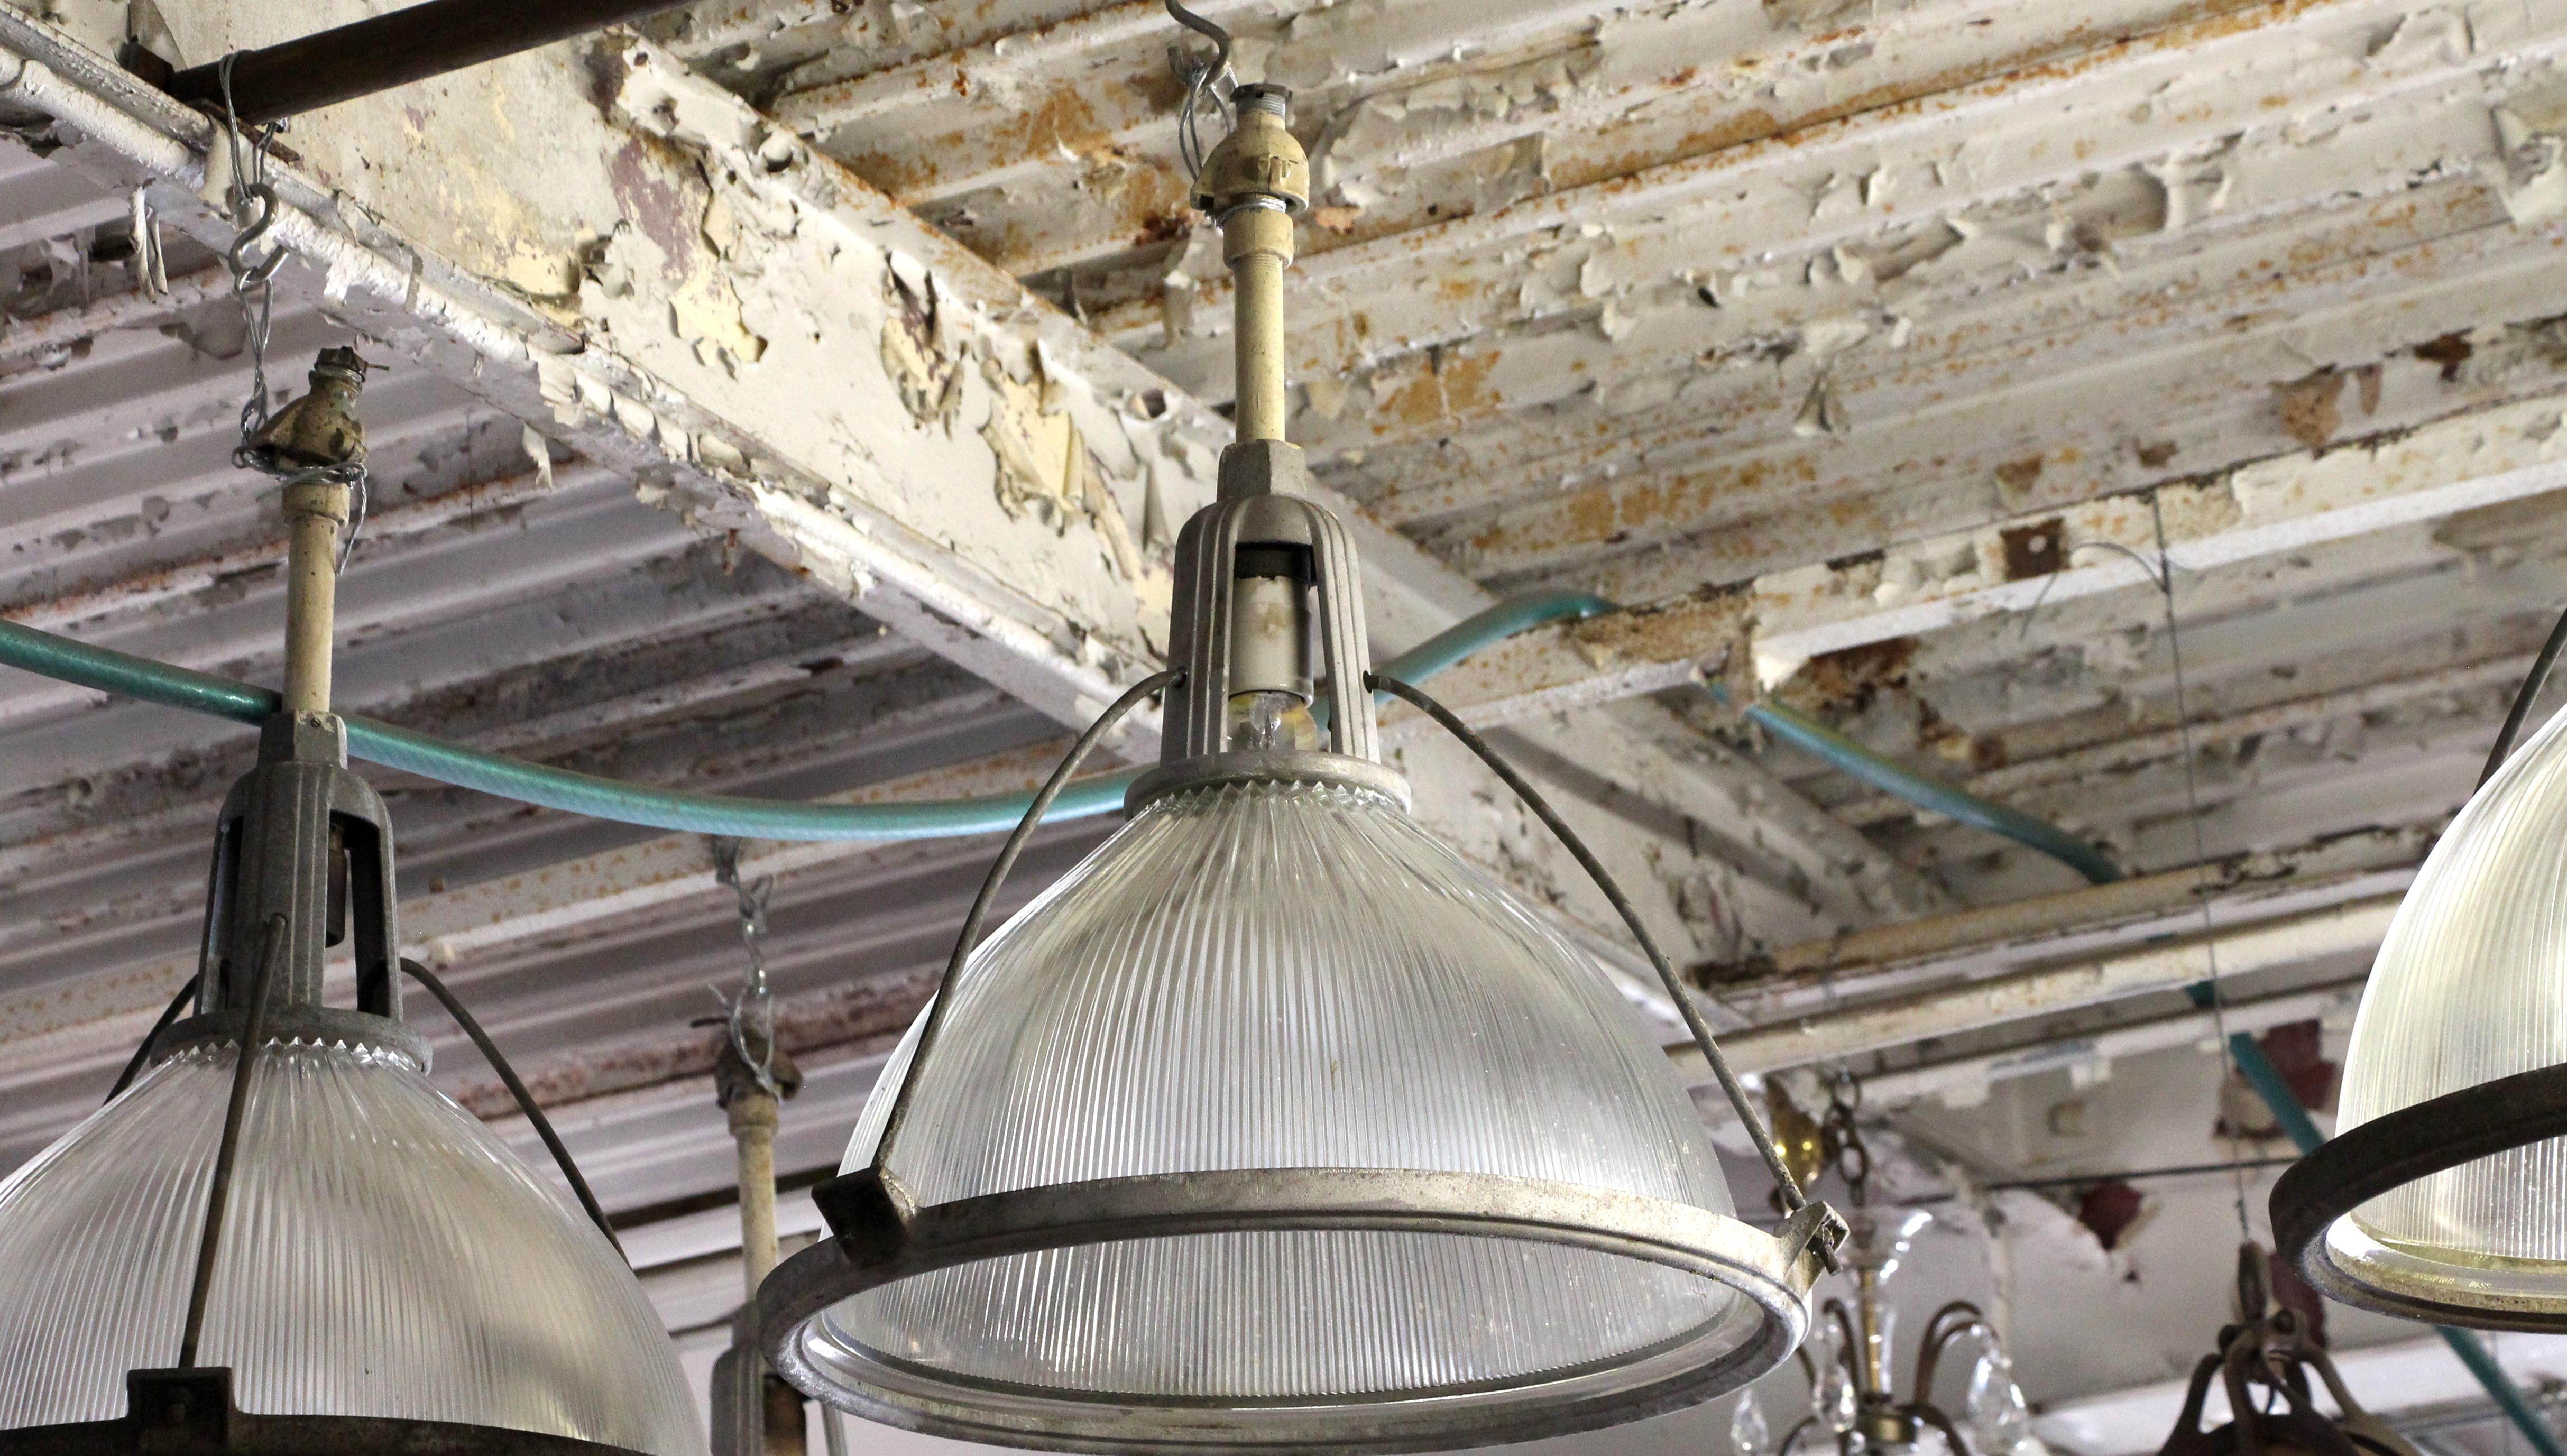 From a large industrial power plant near Shamokin, PA, this 1949 Holophane pendant fixture light is complete with the original cast aluminum Art Deco style fitter and pole. It is pictured here with the natural patina, but the fitter can also be